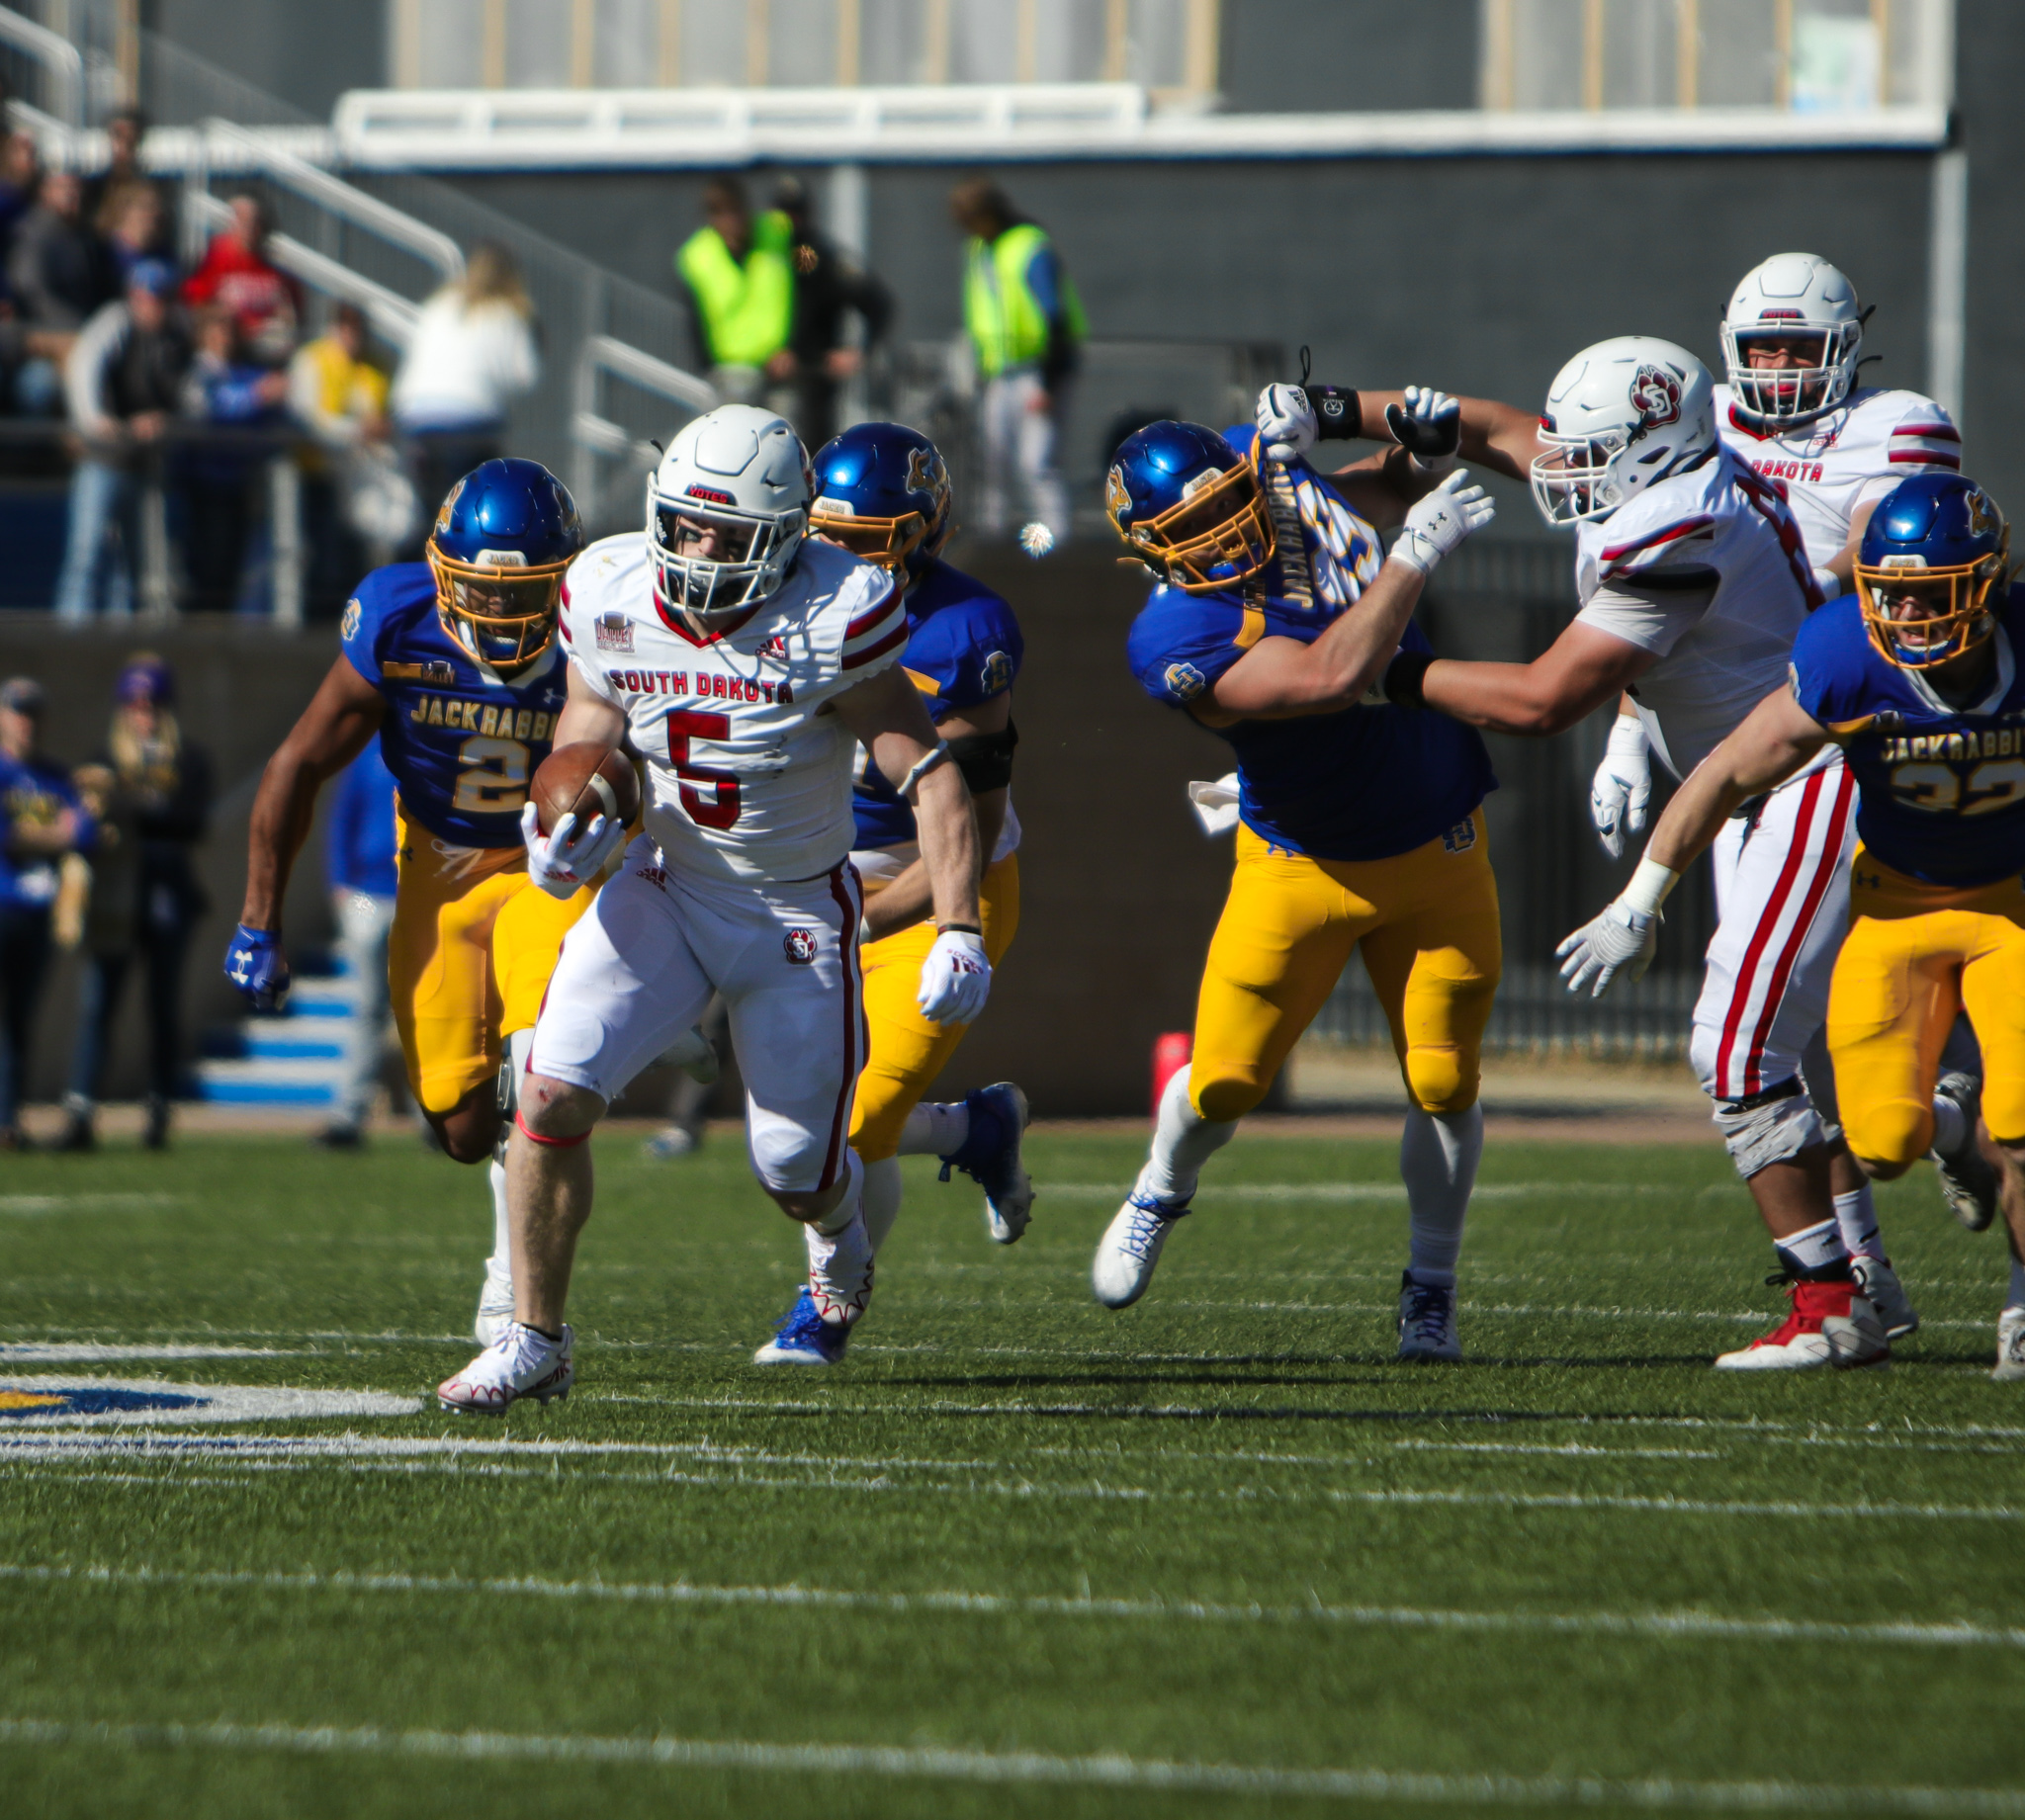 Football Fell in Rivalry Game Against SDSU